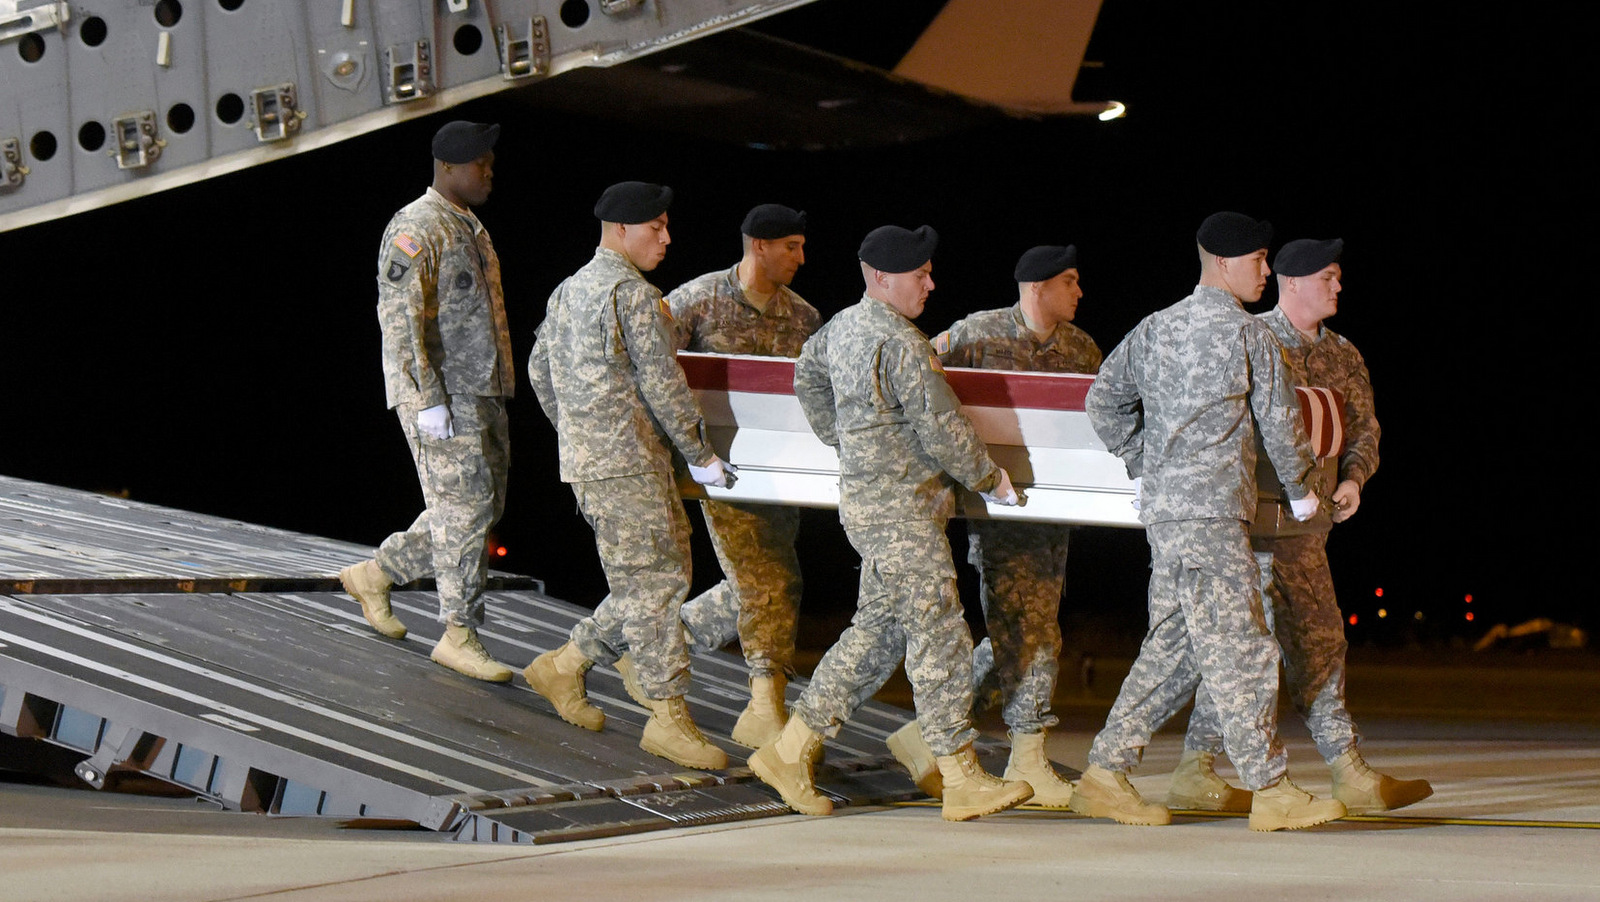 The remains of Staff Sgt. James F. Moriarty were carried by an Army team at Dover Air Force Base in Delaware last week. 